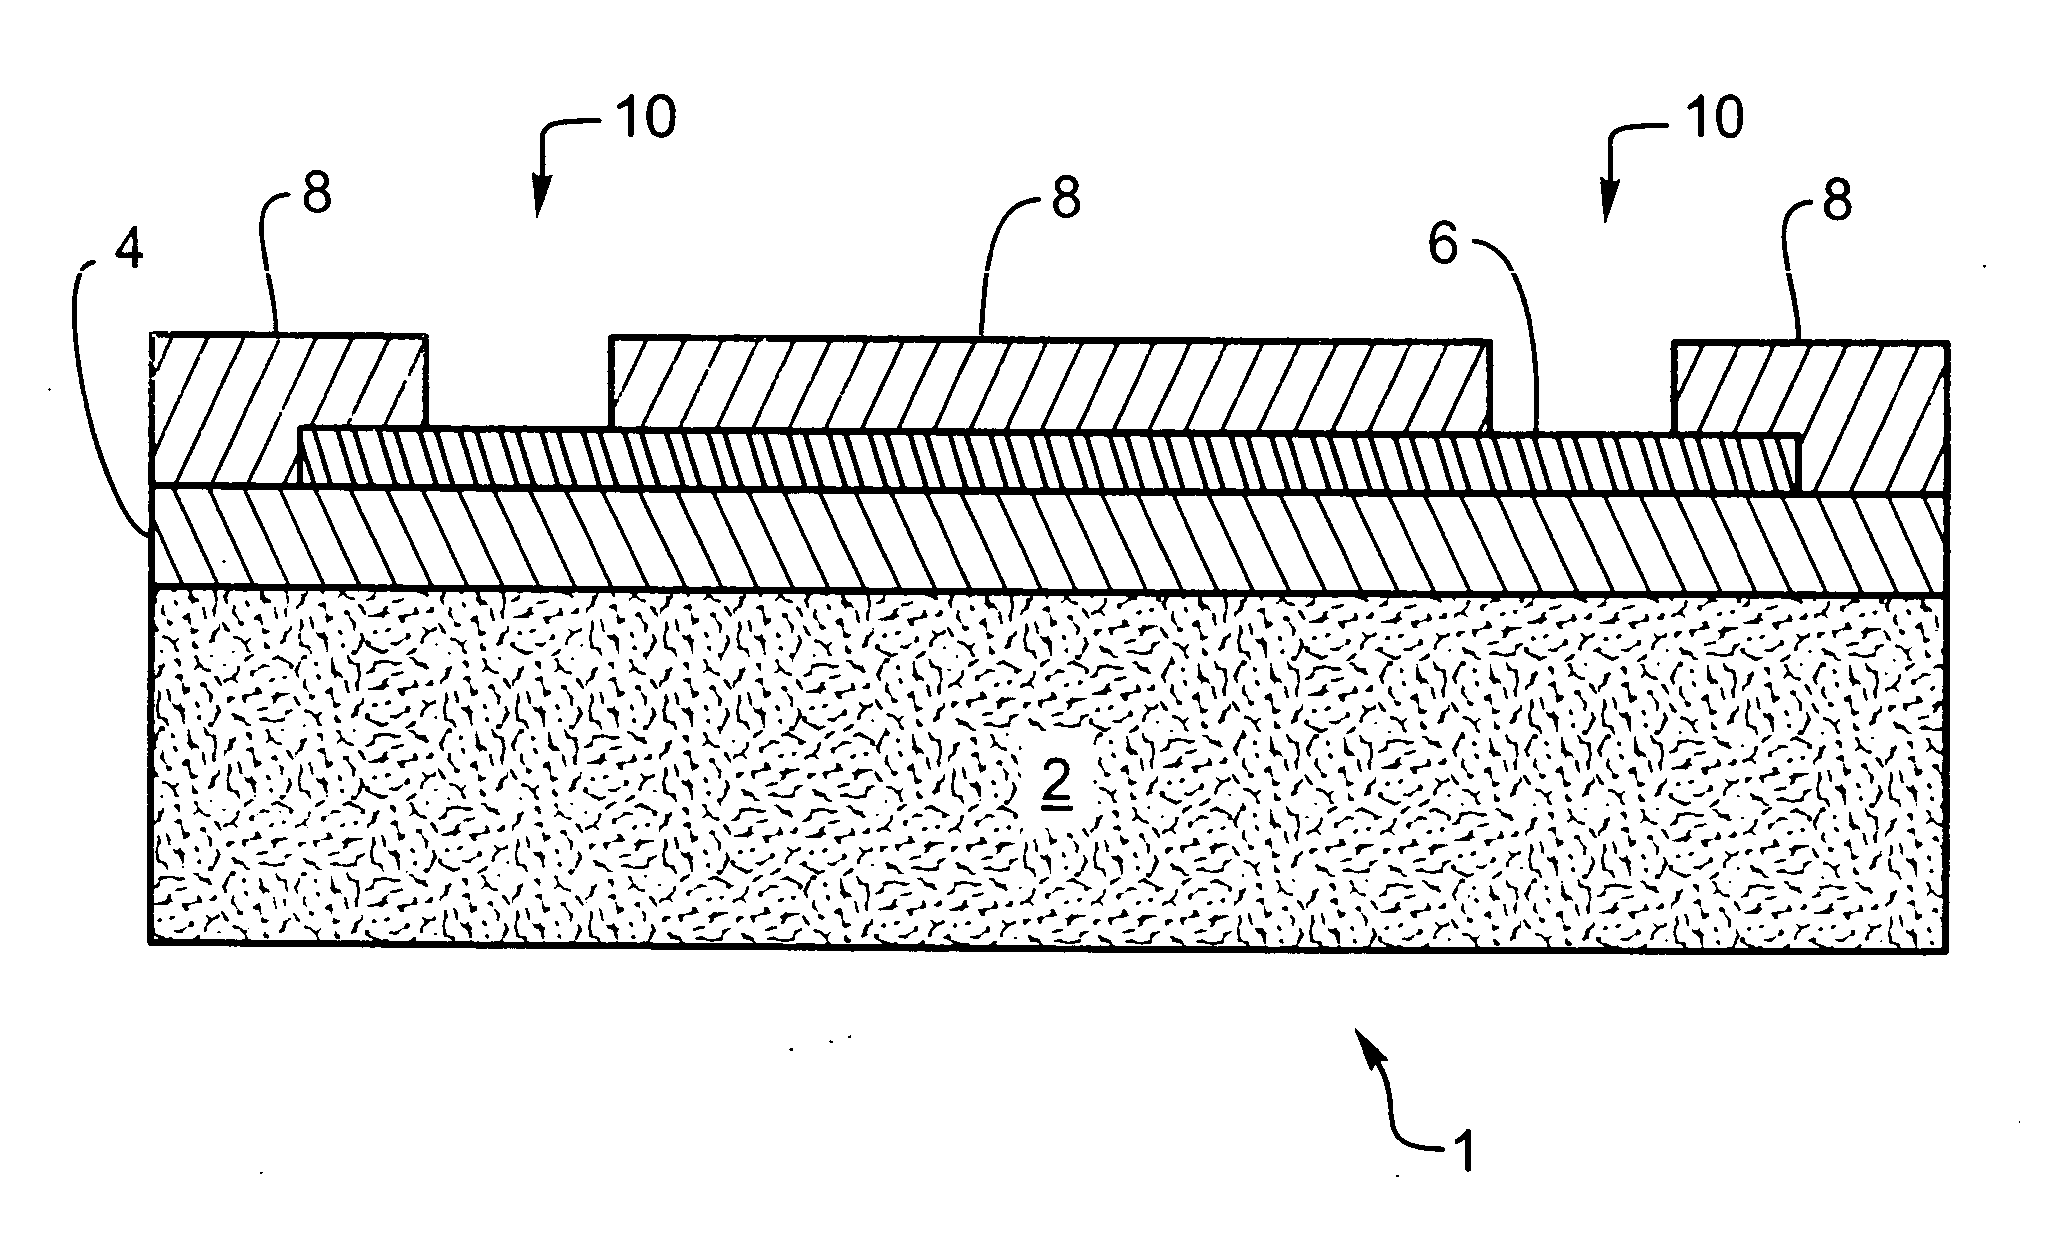 Insulated implantable electrical circuit